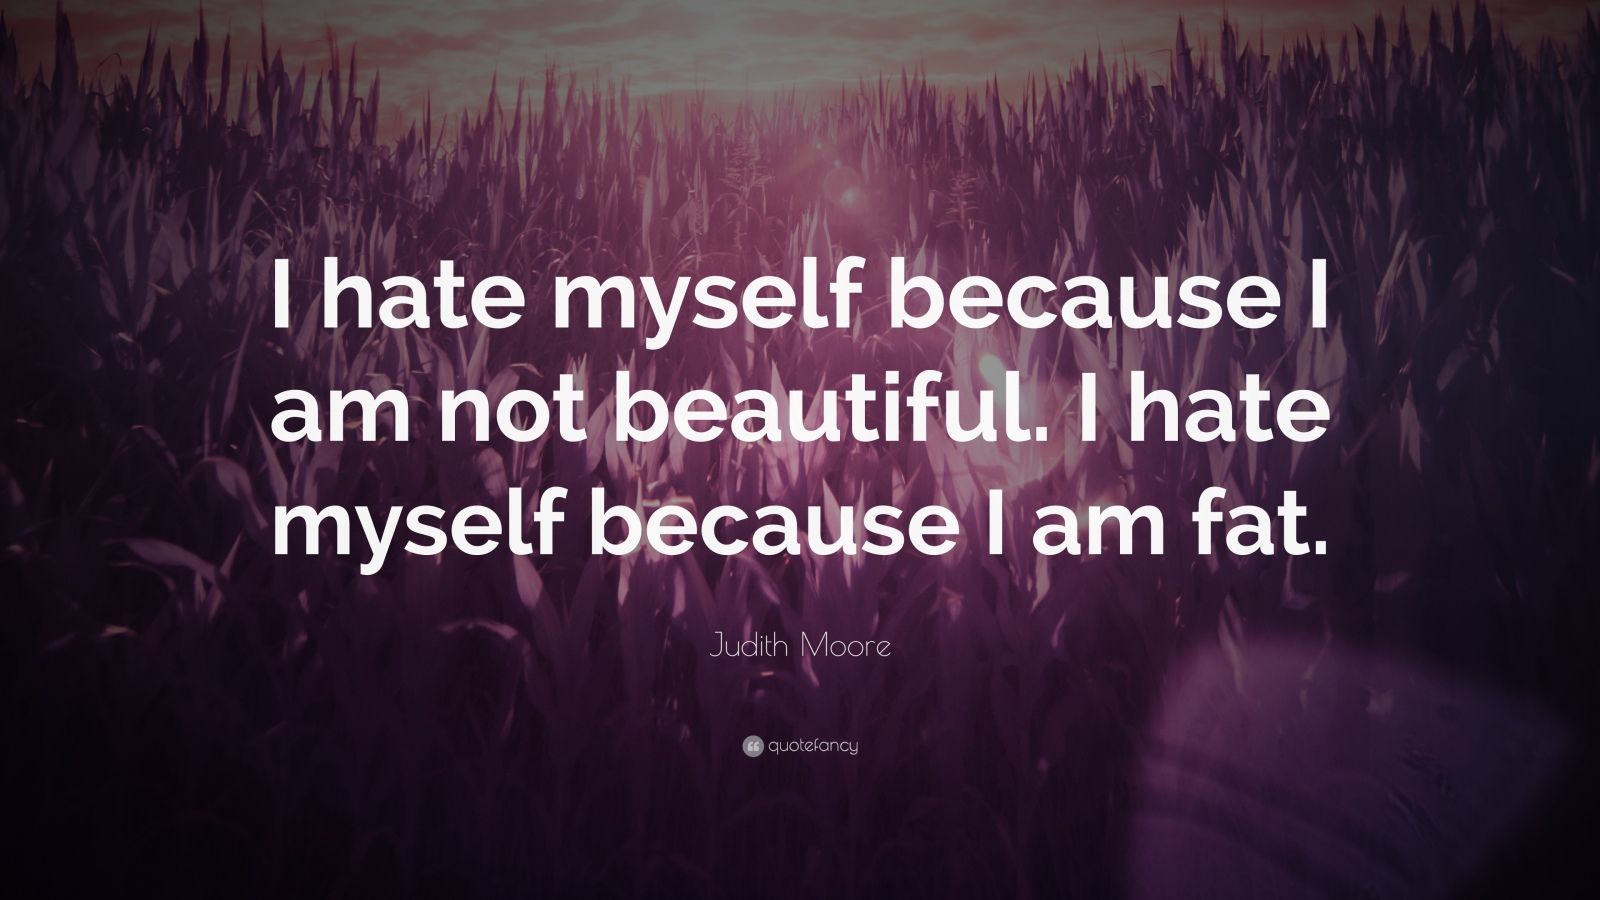 Judith Moore Quote: “I hate myself because I am not beautiful. I ...